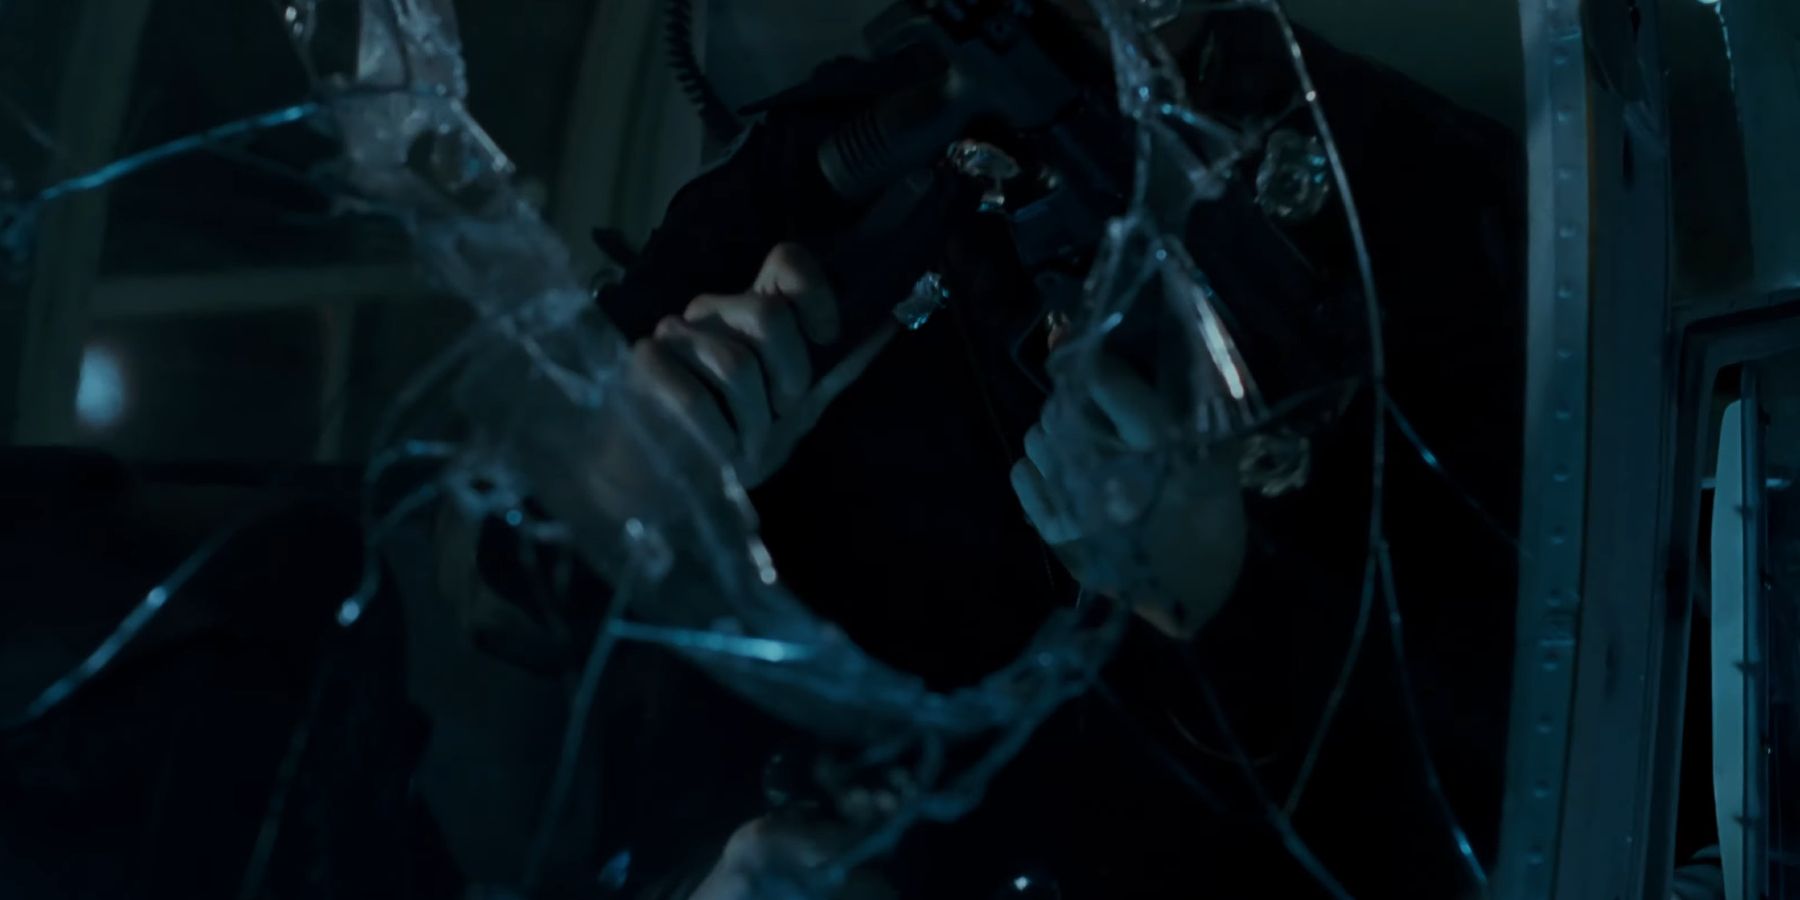 The T-1000 with three arms in Terminator 2 Judgment Day